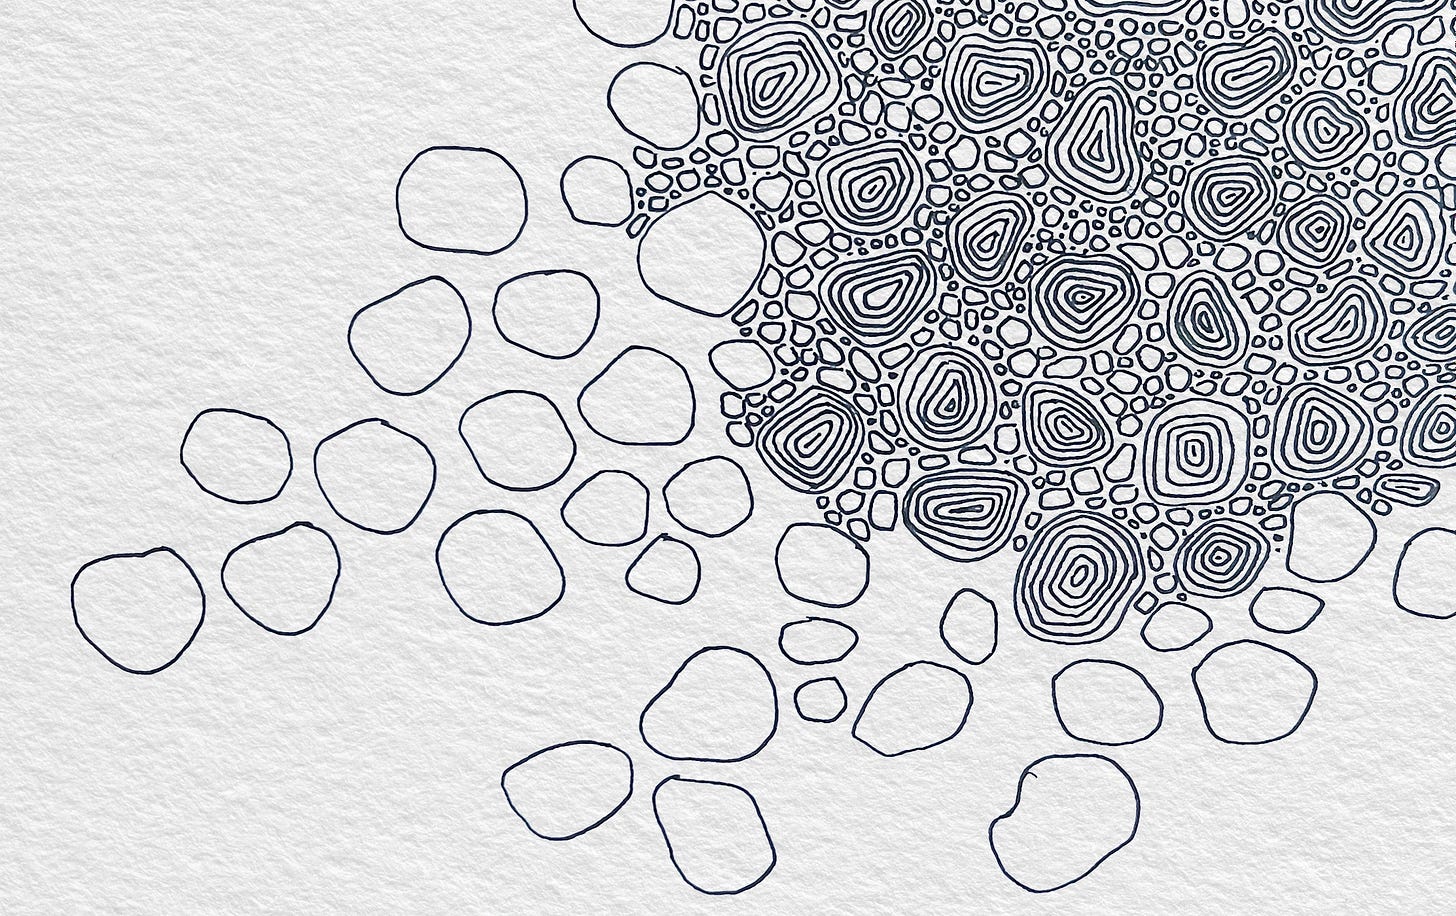 Pattern of cobble stones drawn on textured white paper